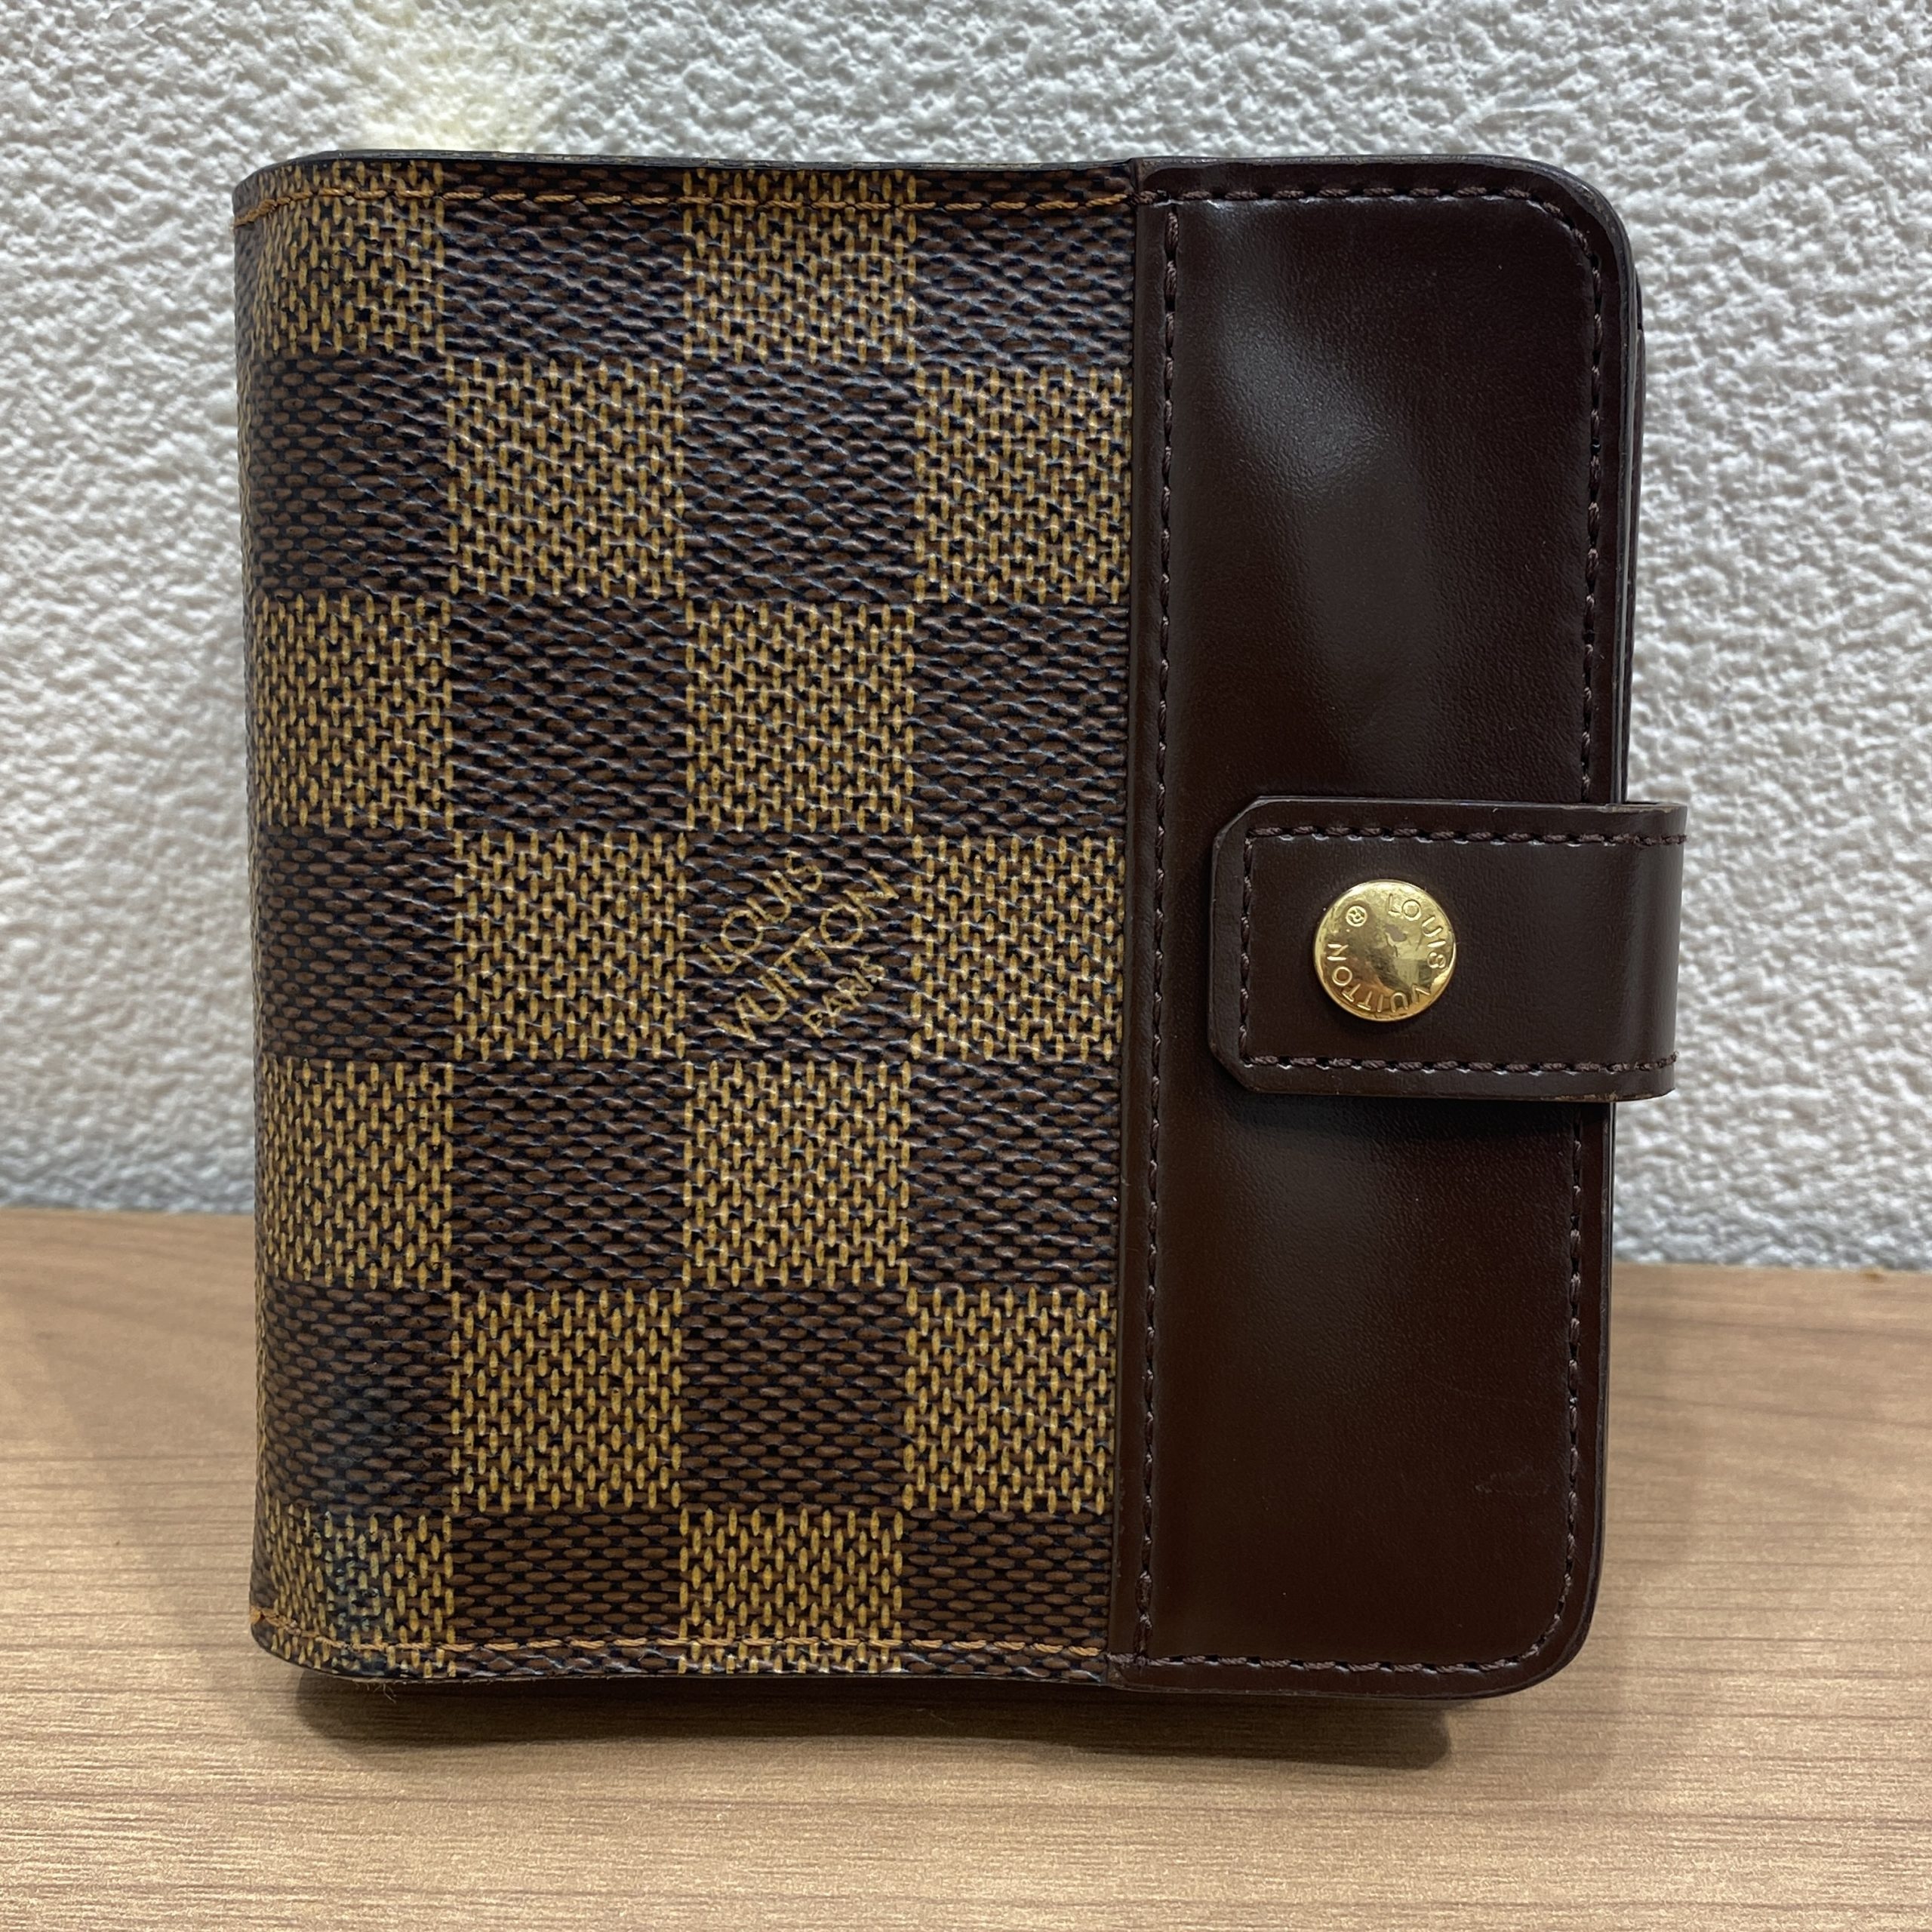 【LOUIS VUITTON/ルイヴィトン】ダミエ コンパクトジップ N61668